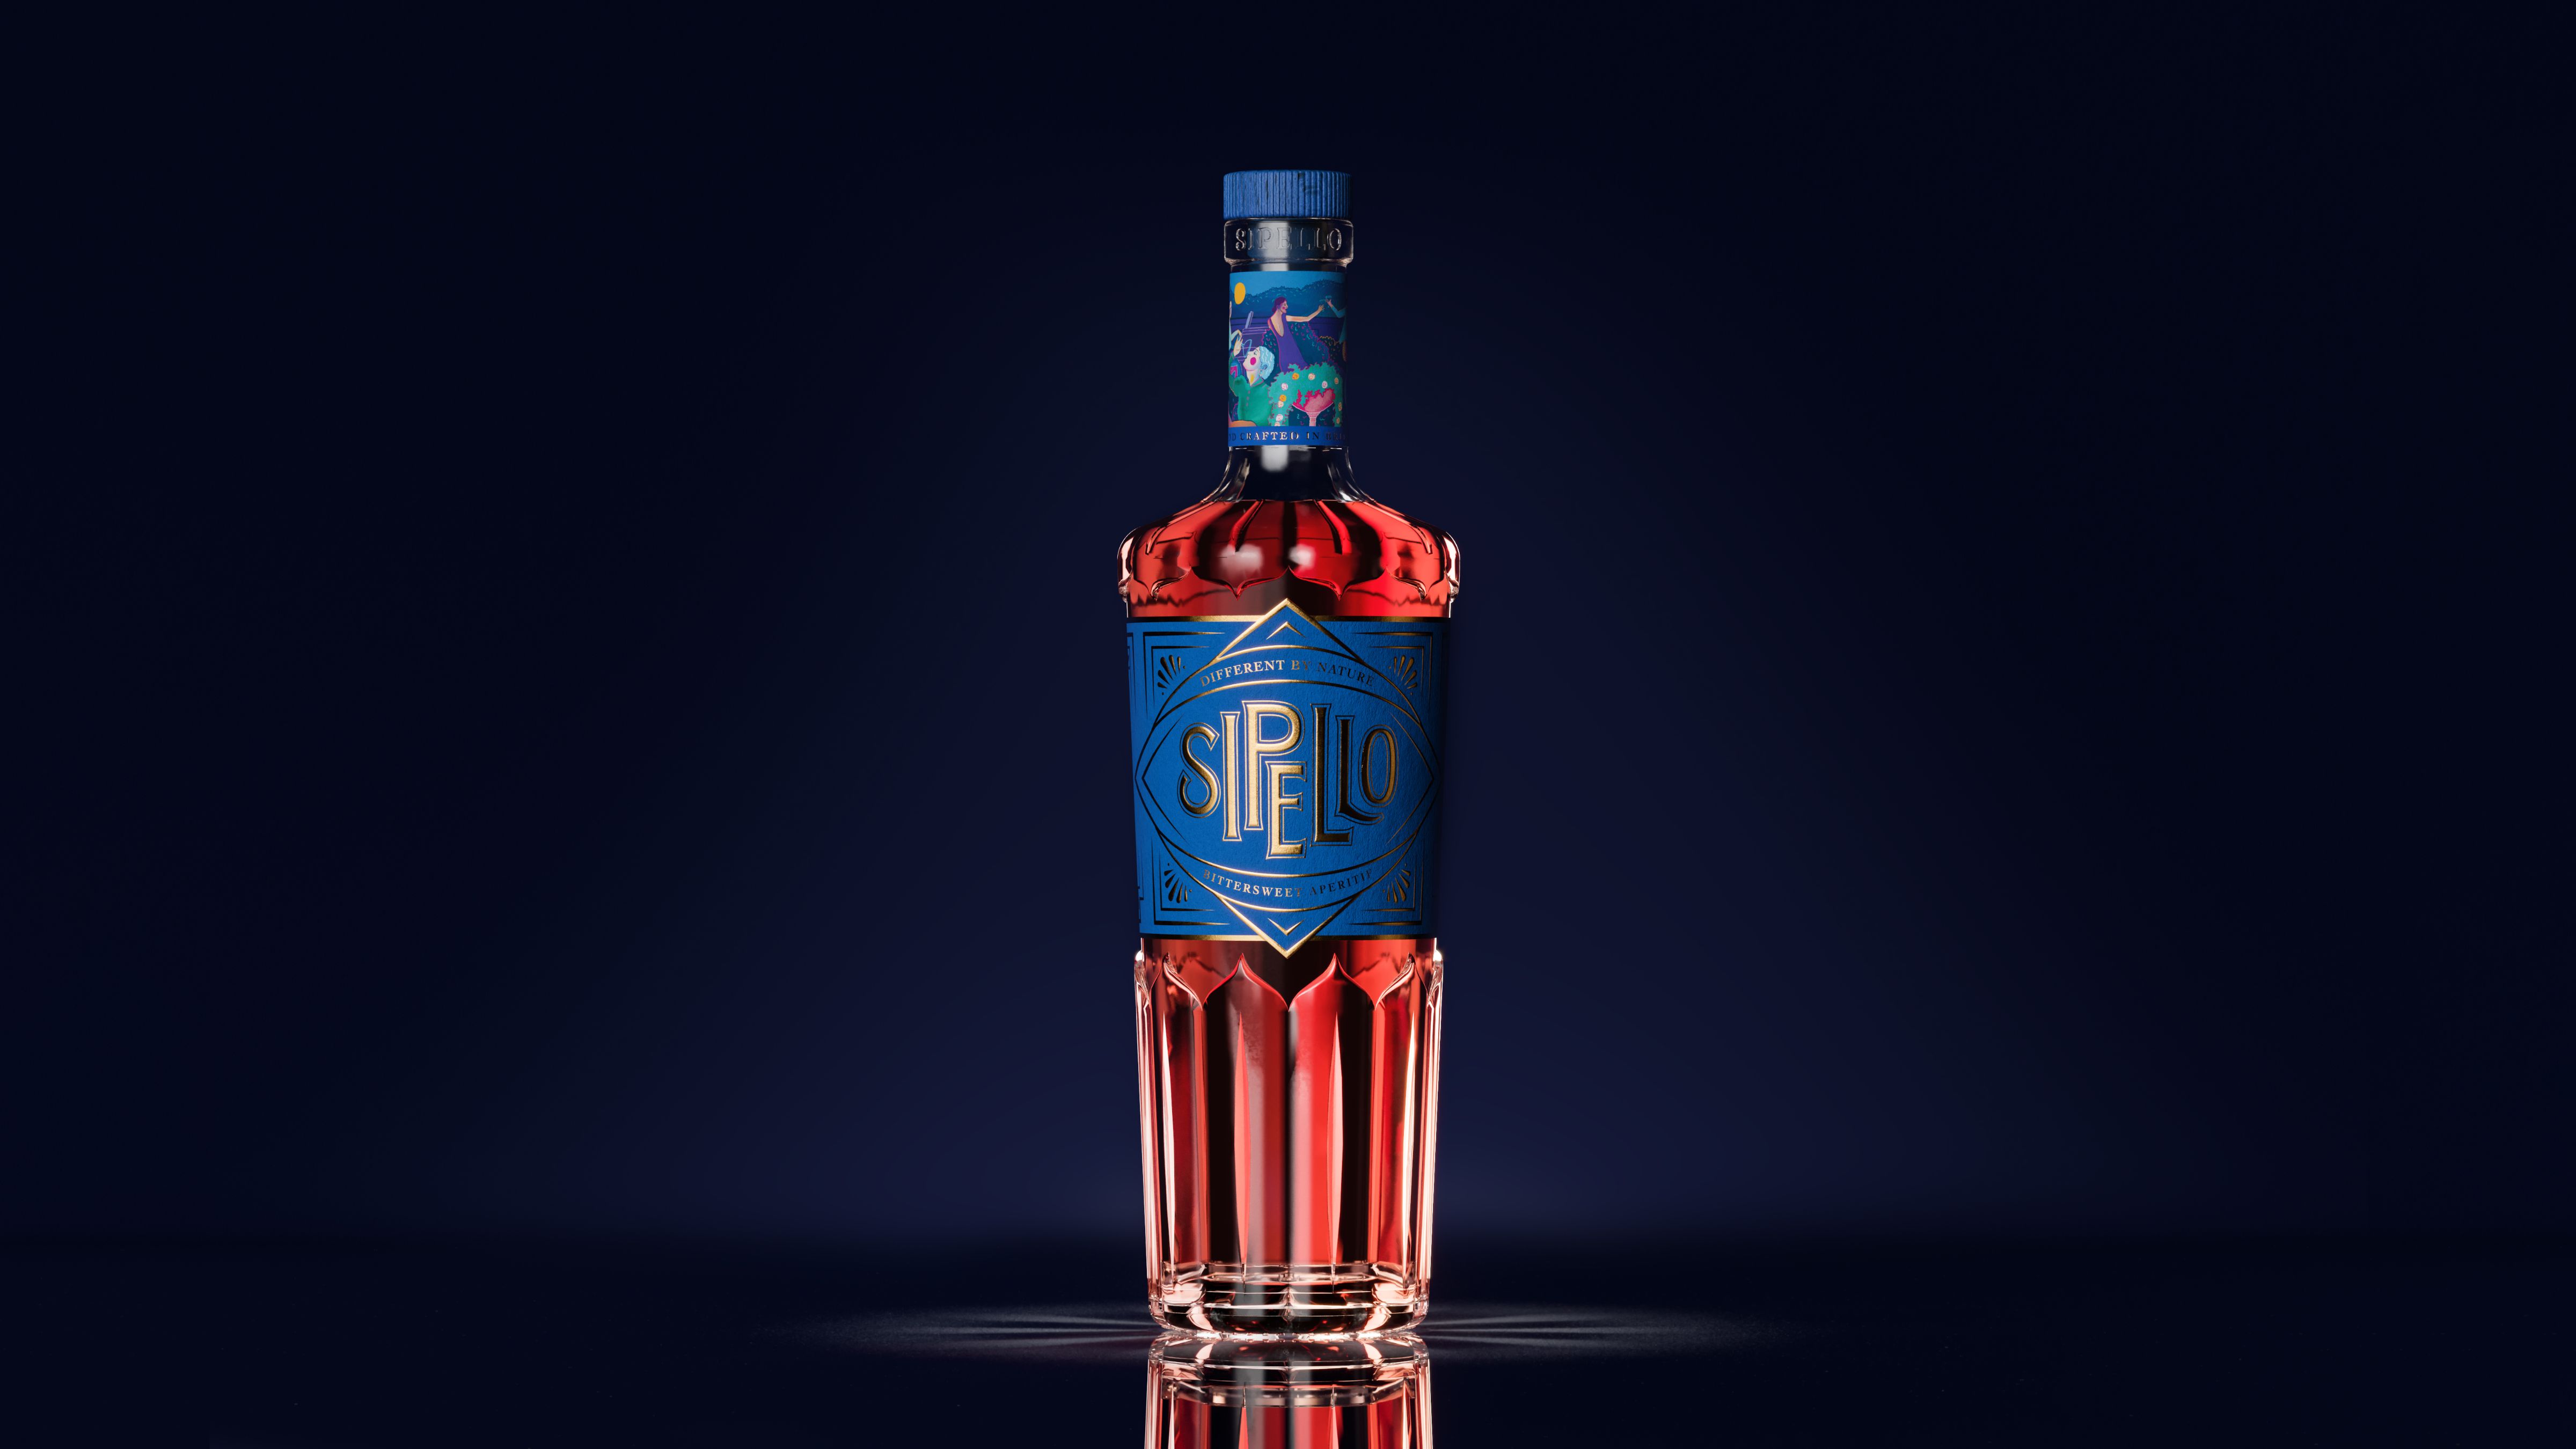 An Opulent British Twist on the Traditional Aperitif